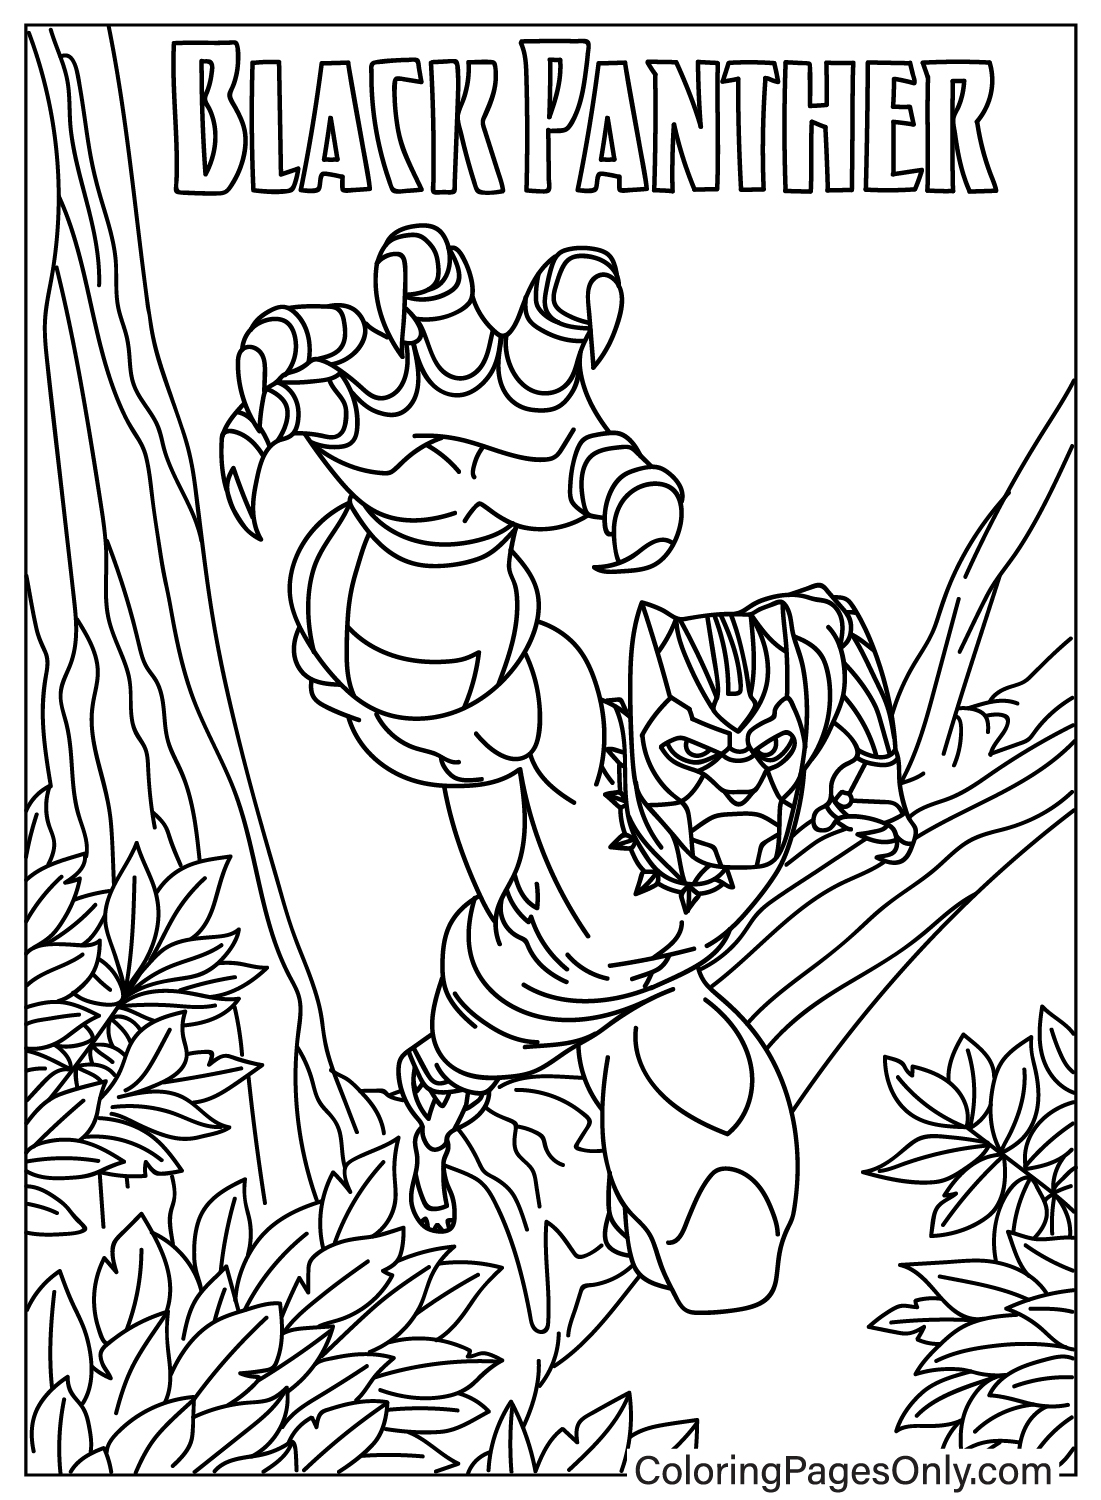 Black Panther coloring pages ...